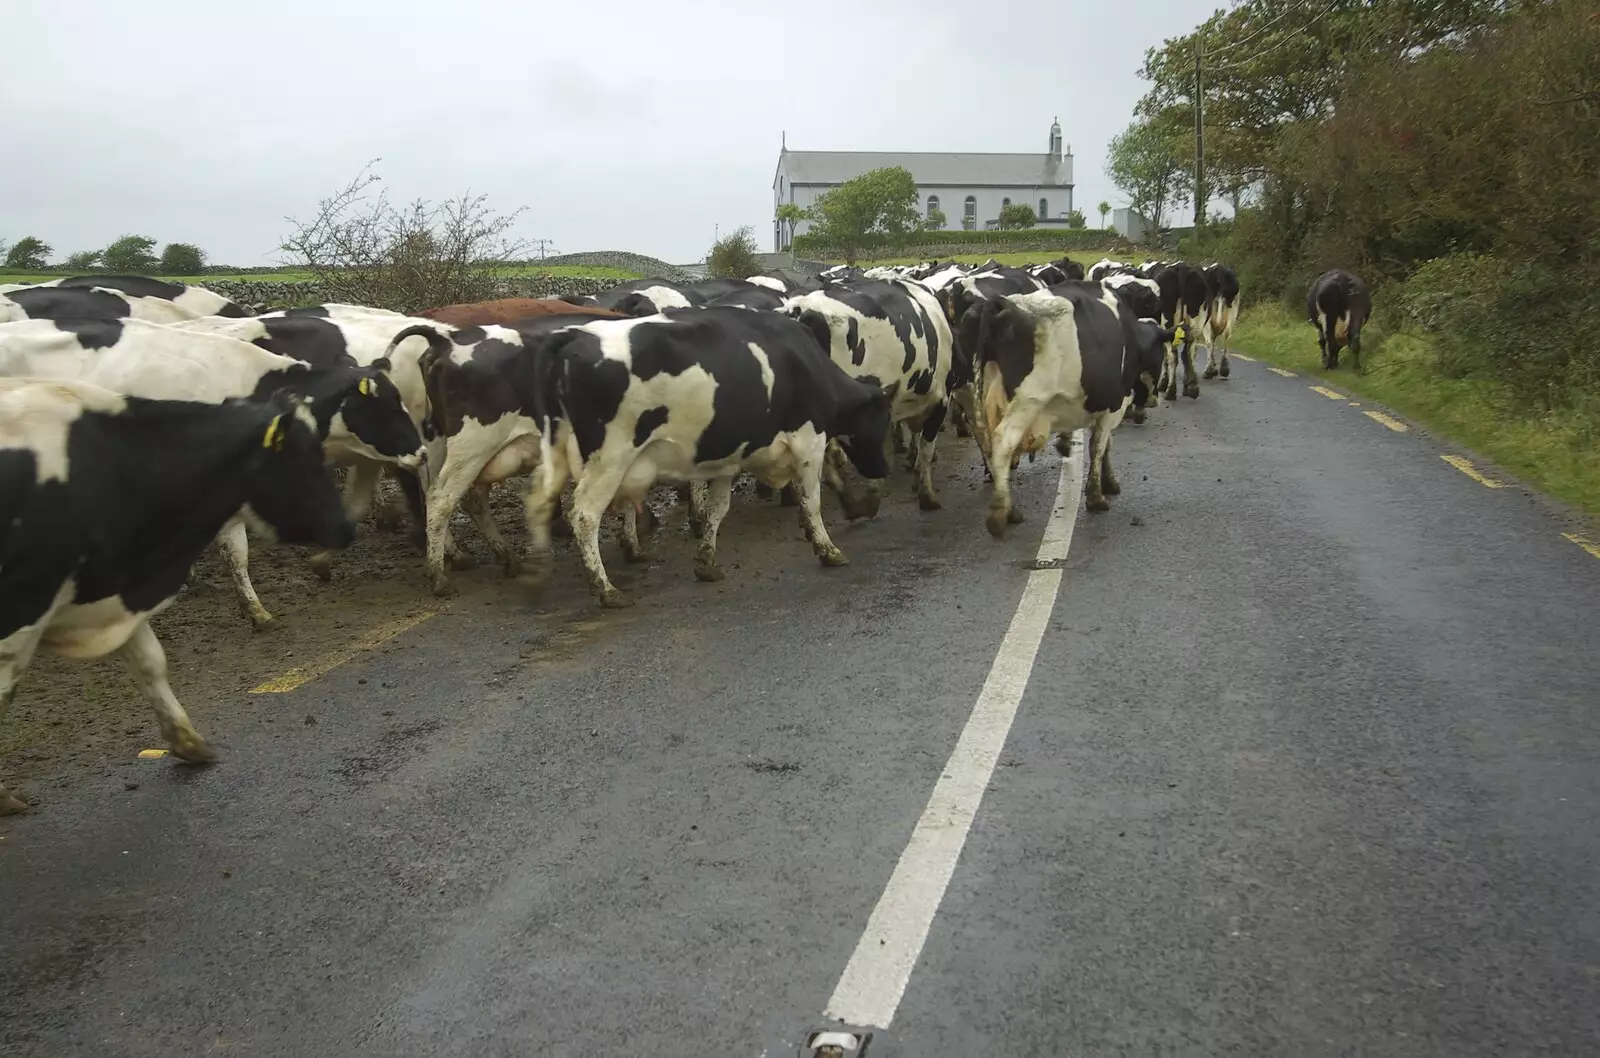 There's a cow traffic jam, from Kilkee to Galway, Connacht, Ireland - 23rd September 2007